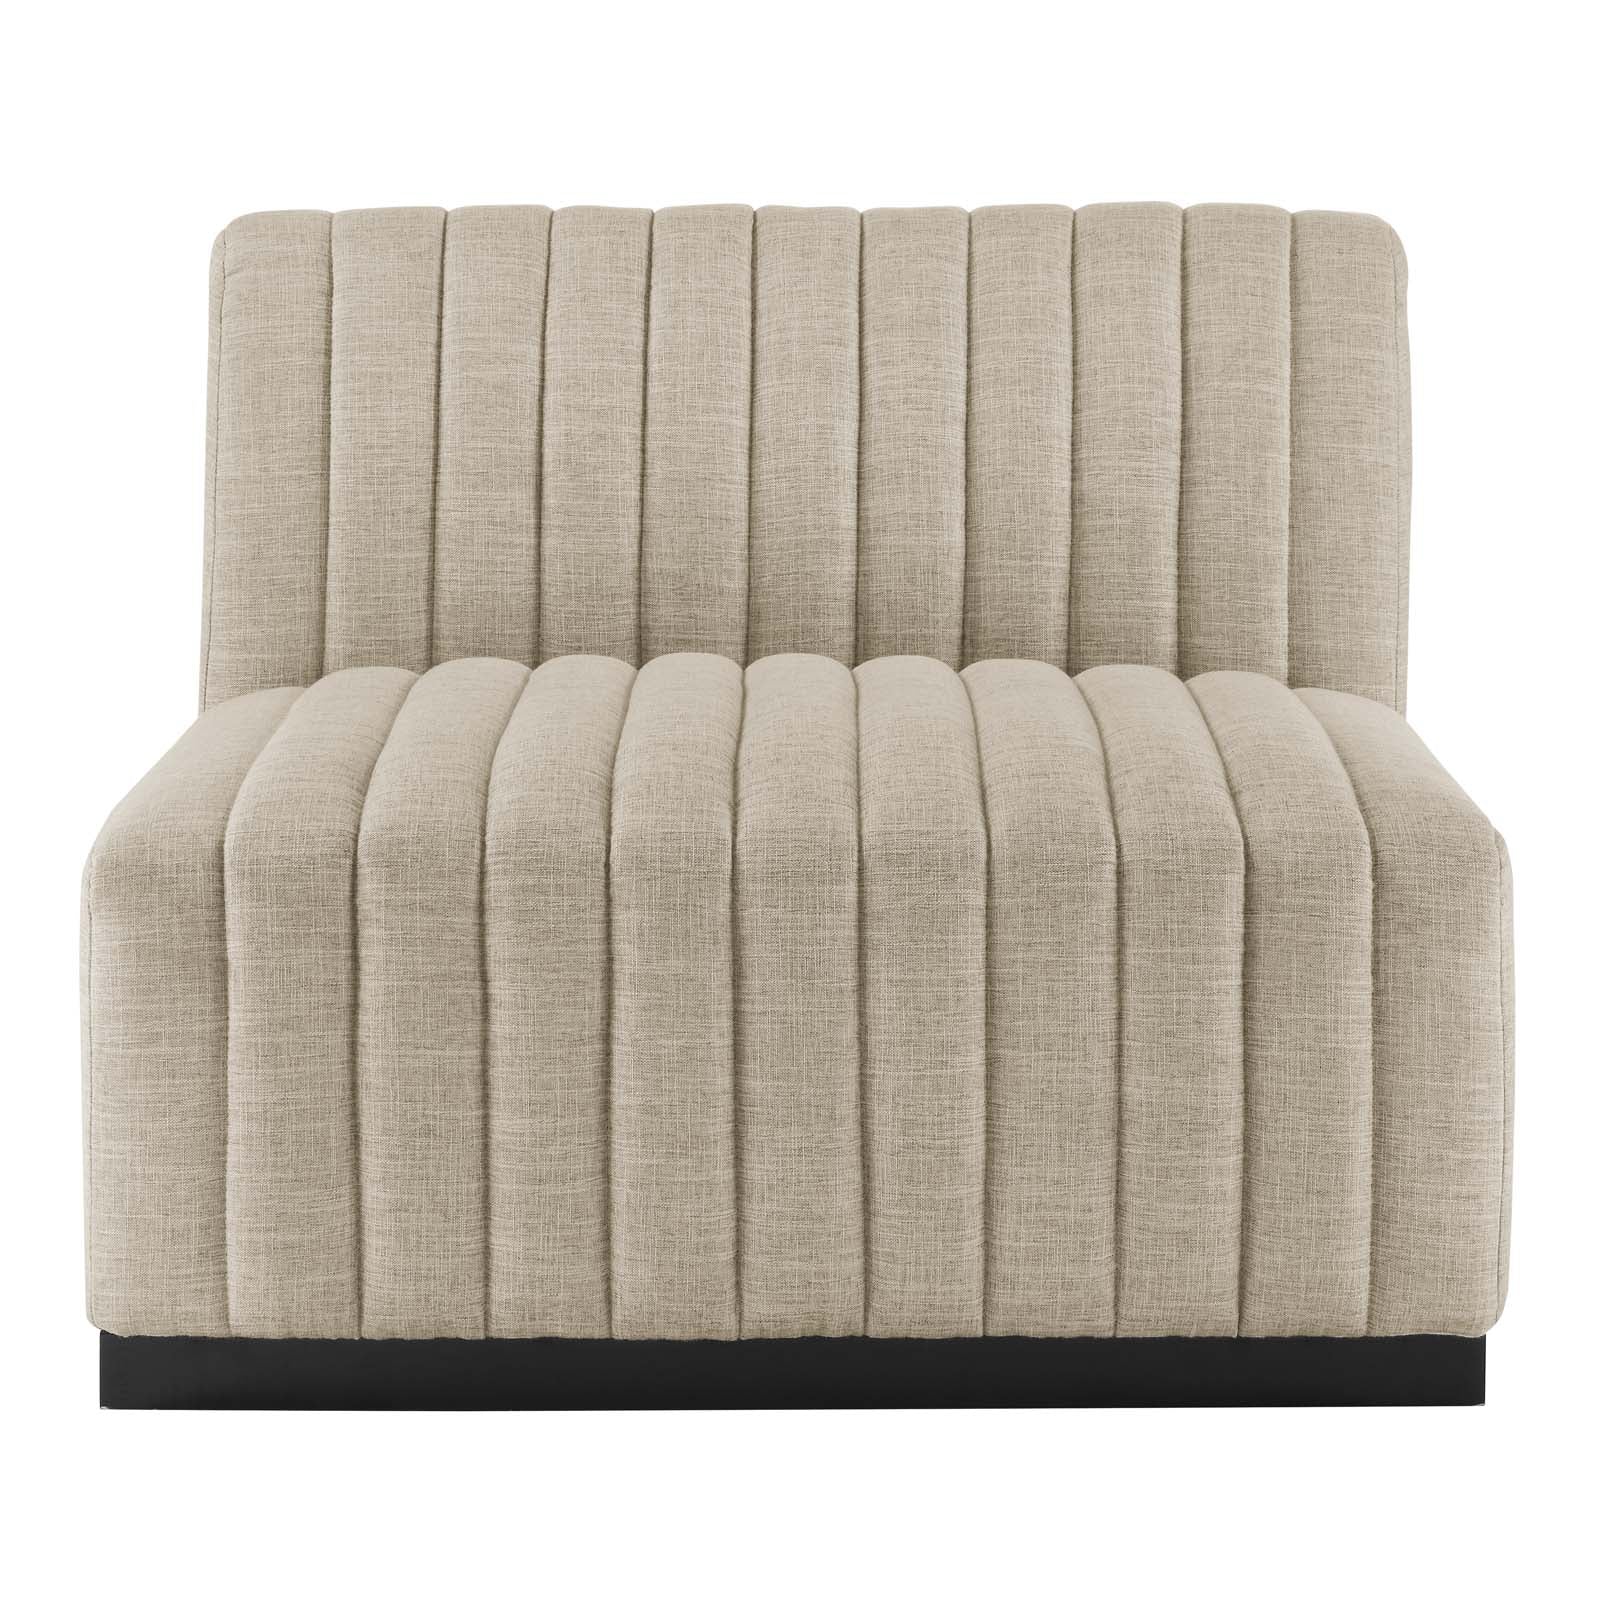 Modway Accent Chairs - Conjure Channel Tufted Upholstered Fabric Armless Chair Black Beige